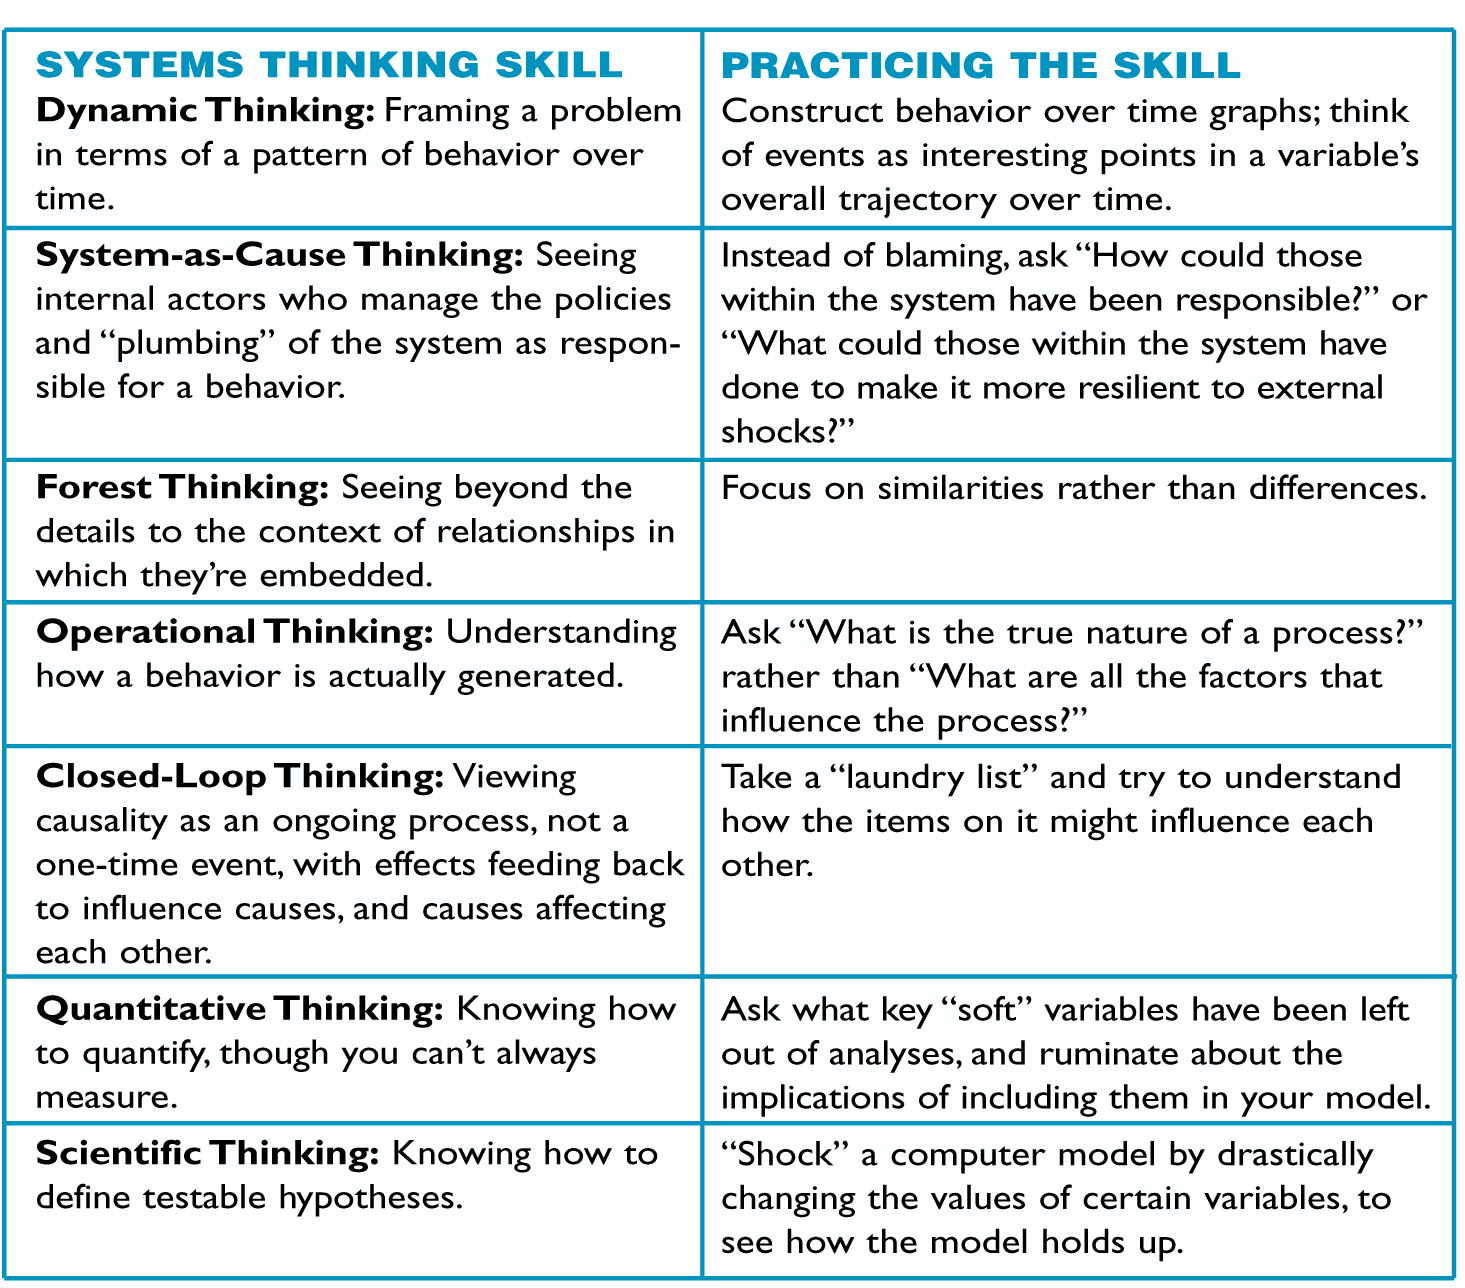 SYSTEMS THINKING AND PRACTICING THE SKILL